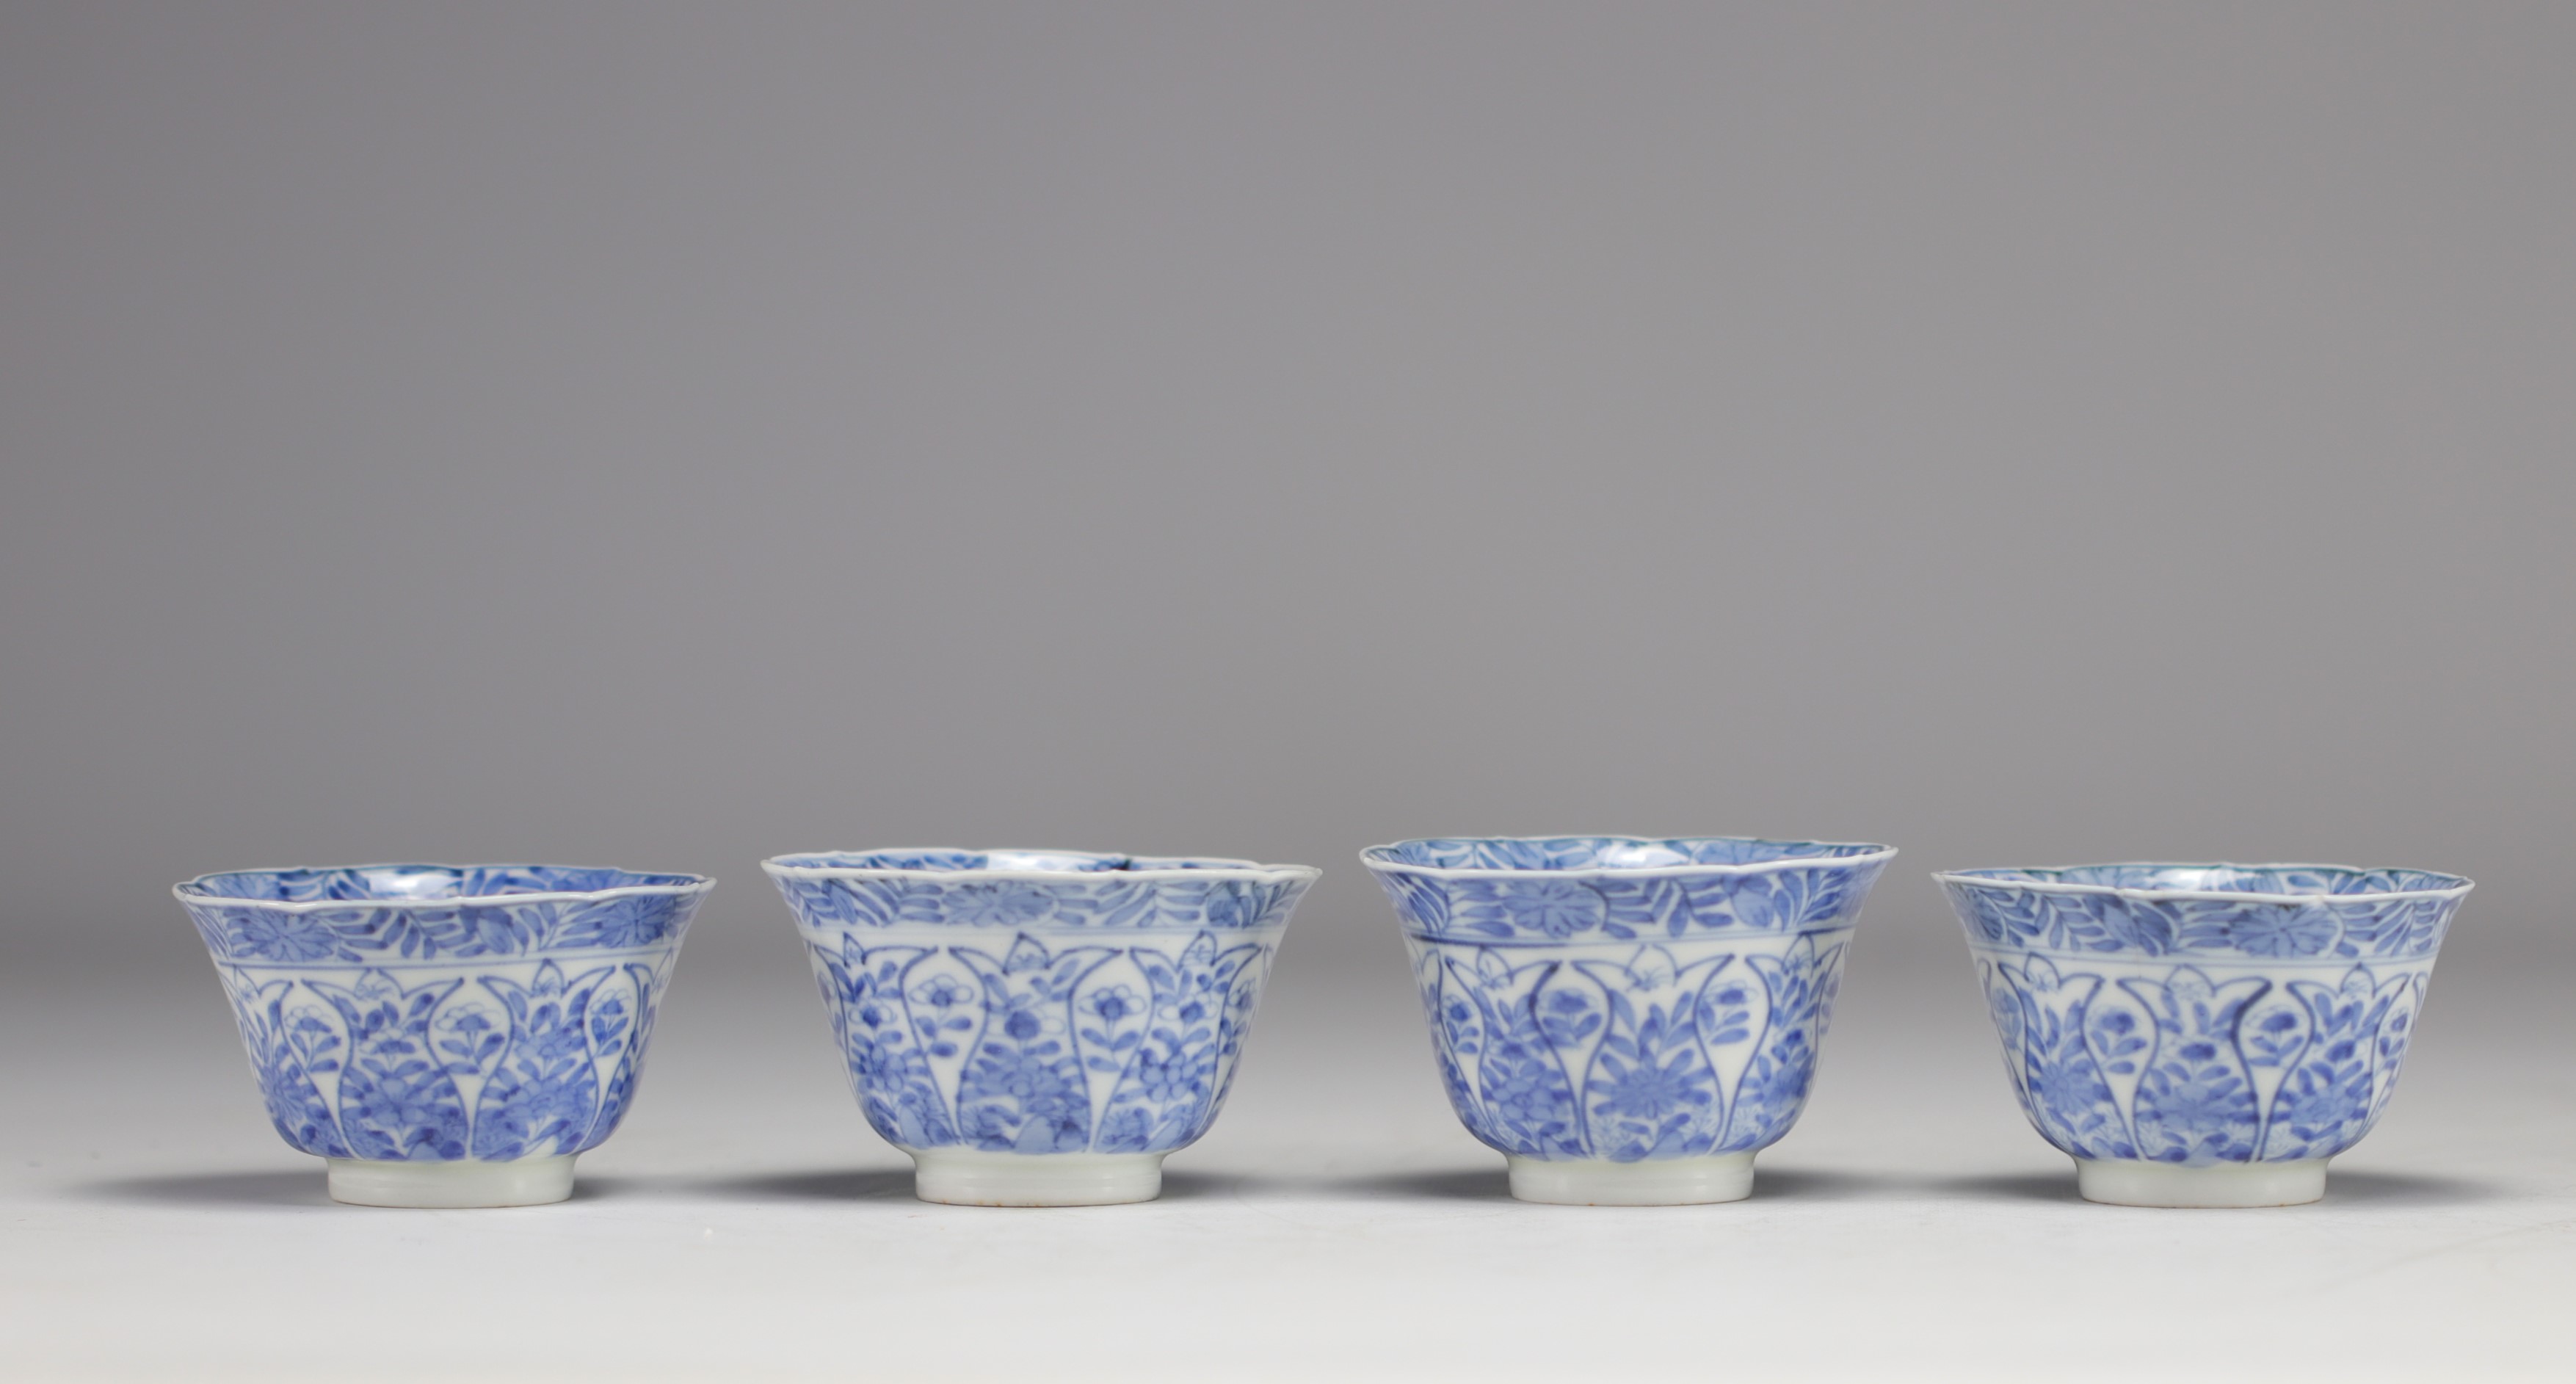 Set of white and blue bowls and saucers with various flower decorations from 18th century - Image 5 of 6